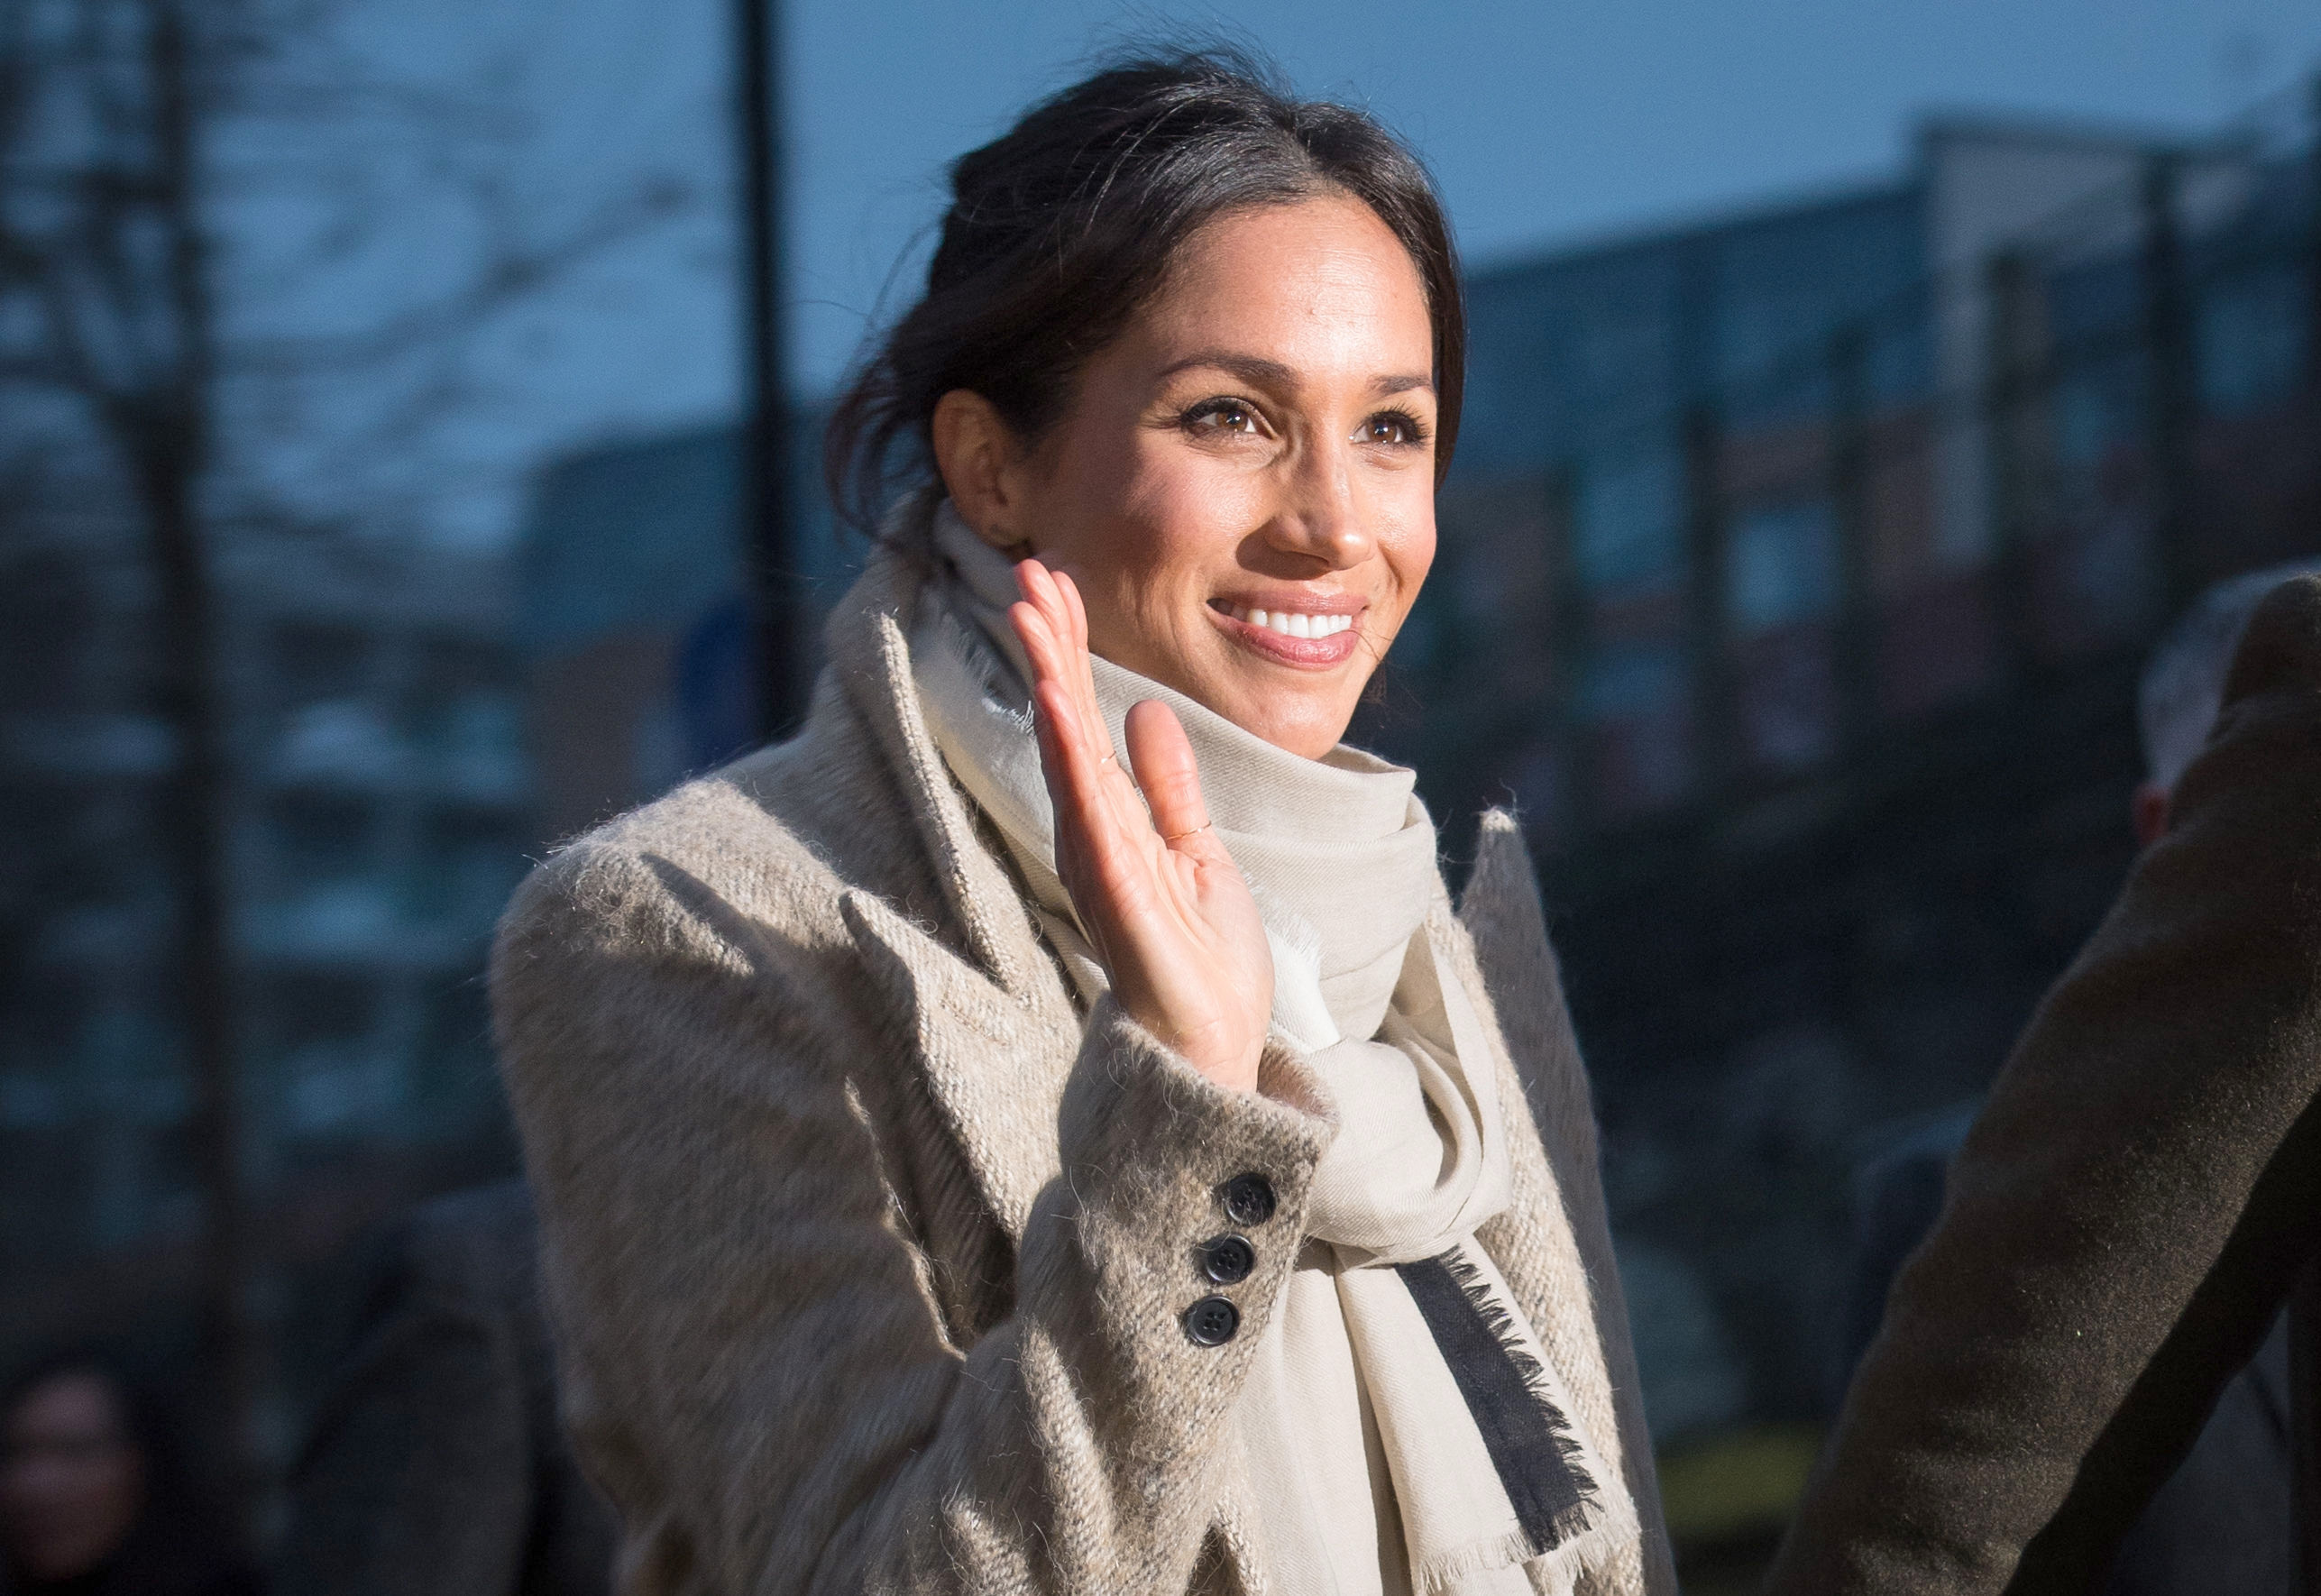 PHOTO: Meghan Markle waves to the crowd after a visit to Reprezent 107.3FM in Pop Brixton, Jan. 9, 2018, in London.